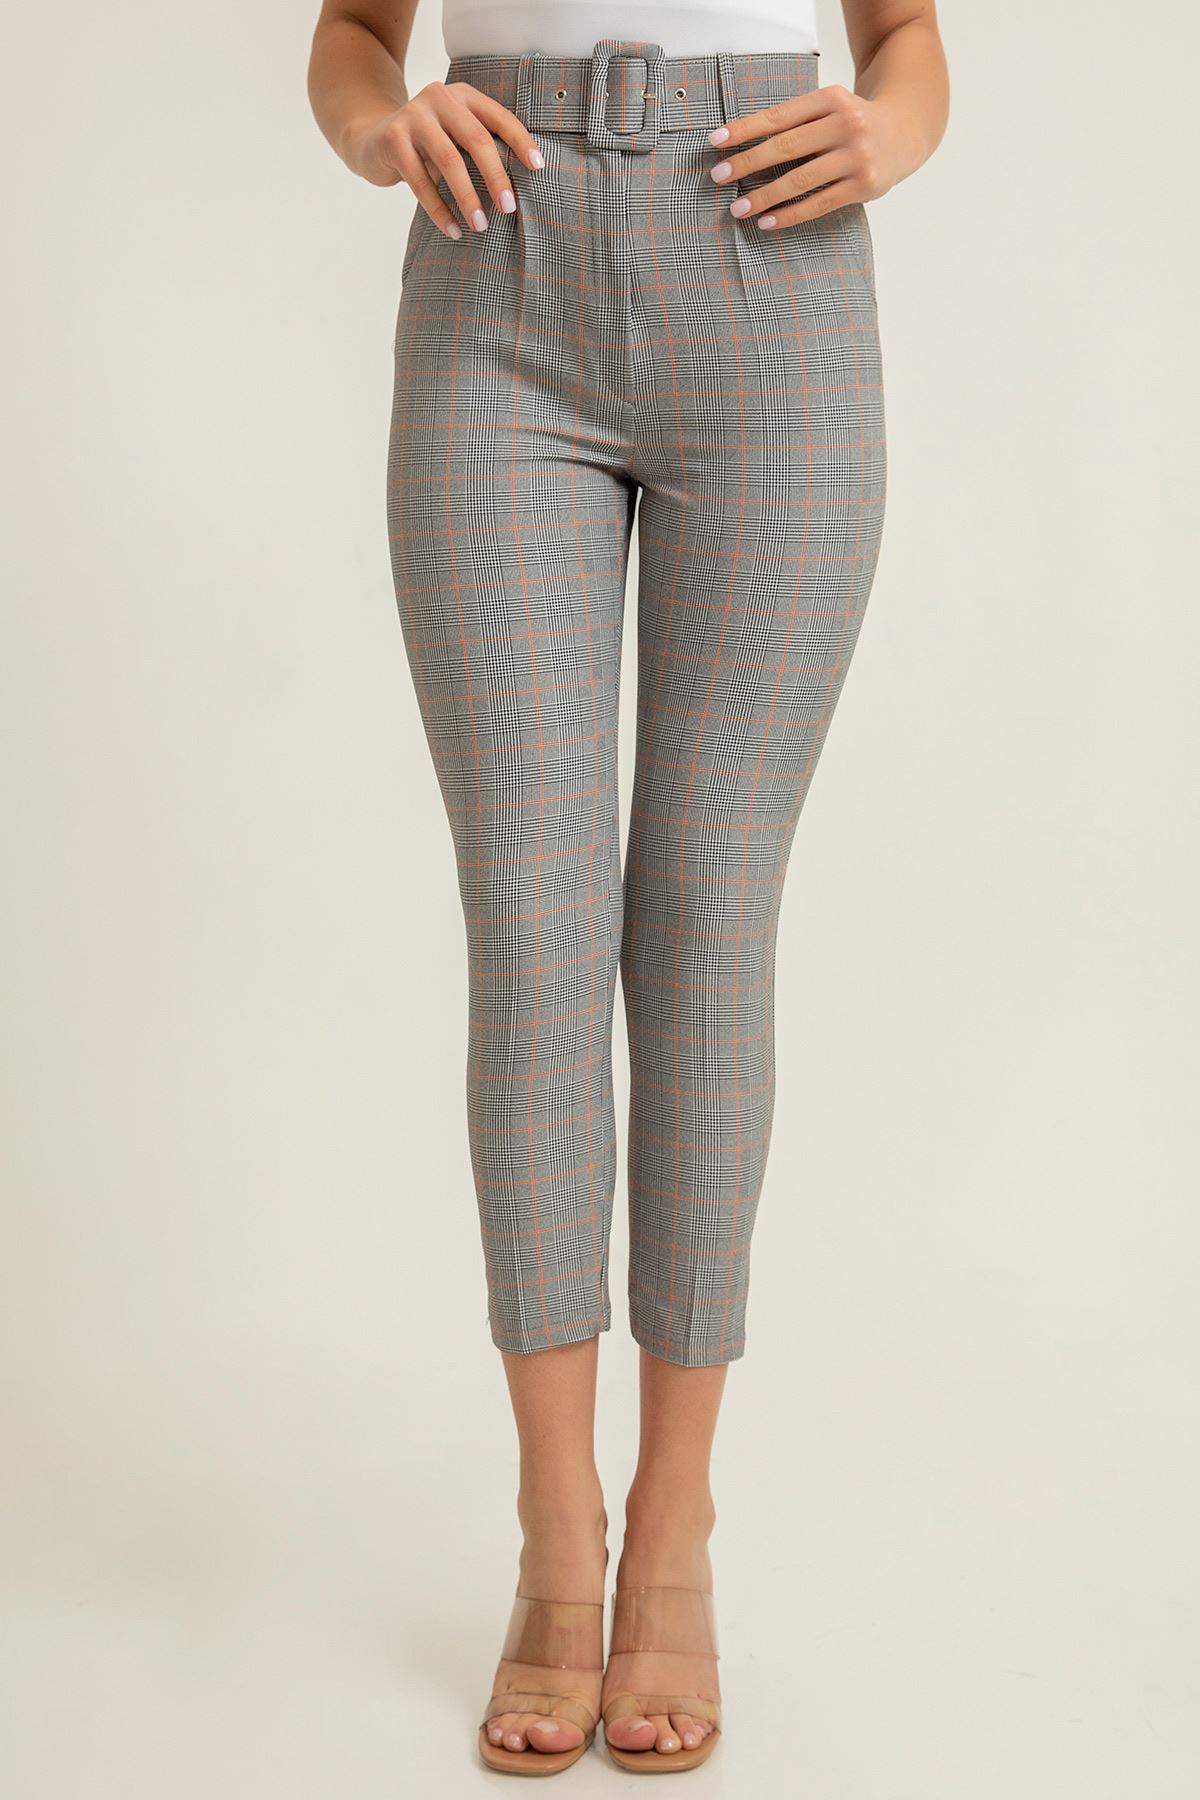 Plaid Fabric Ankle Length Classical Striped Women'S Trouser With Belt - Orange